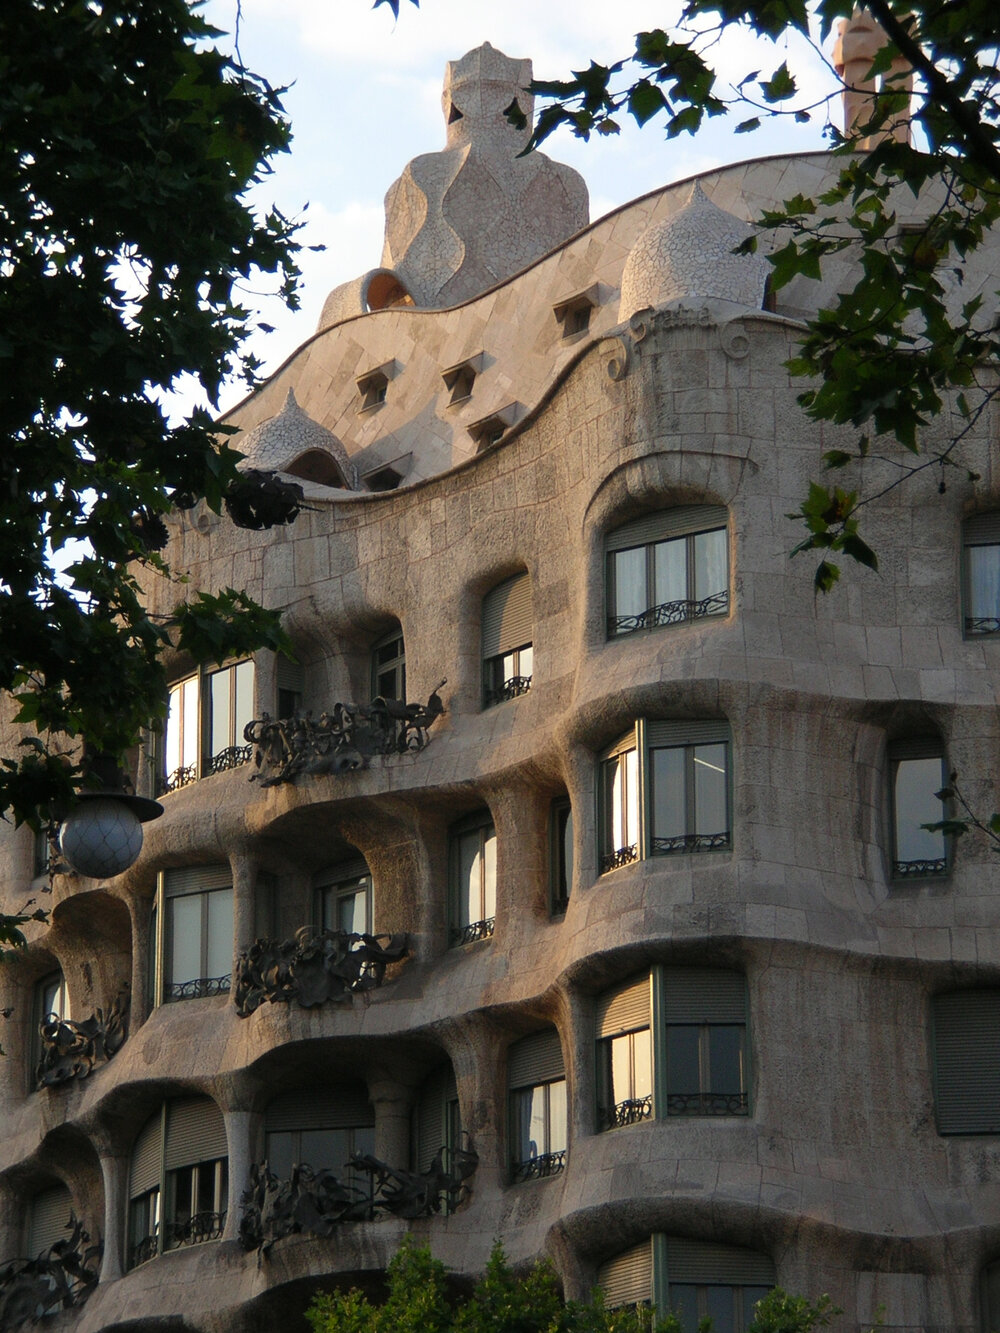  Visit La Pedrera, a modernist apartment building built in the early 1900’s by Gaudí, which manages to look futuristic even by today’s design standards. The rooftop chimneys are actually sculptures 